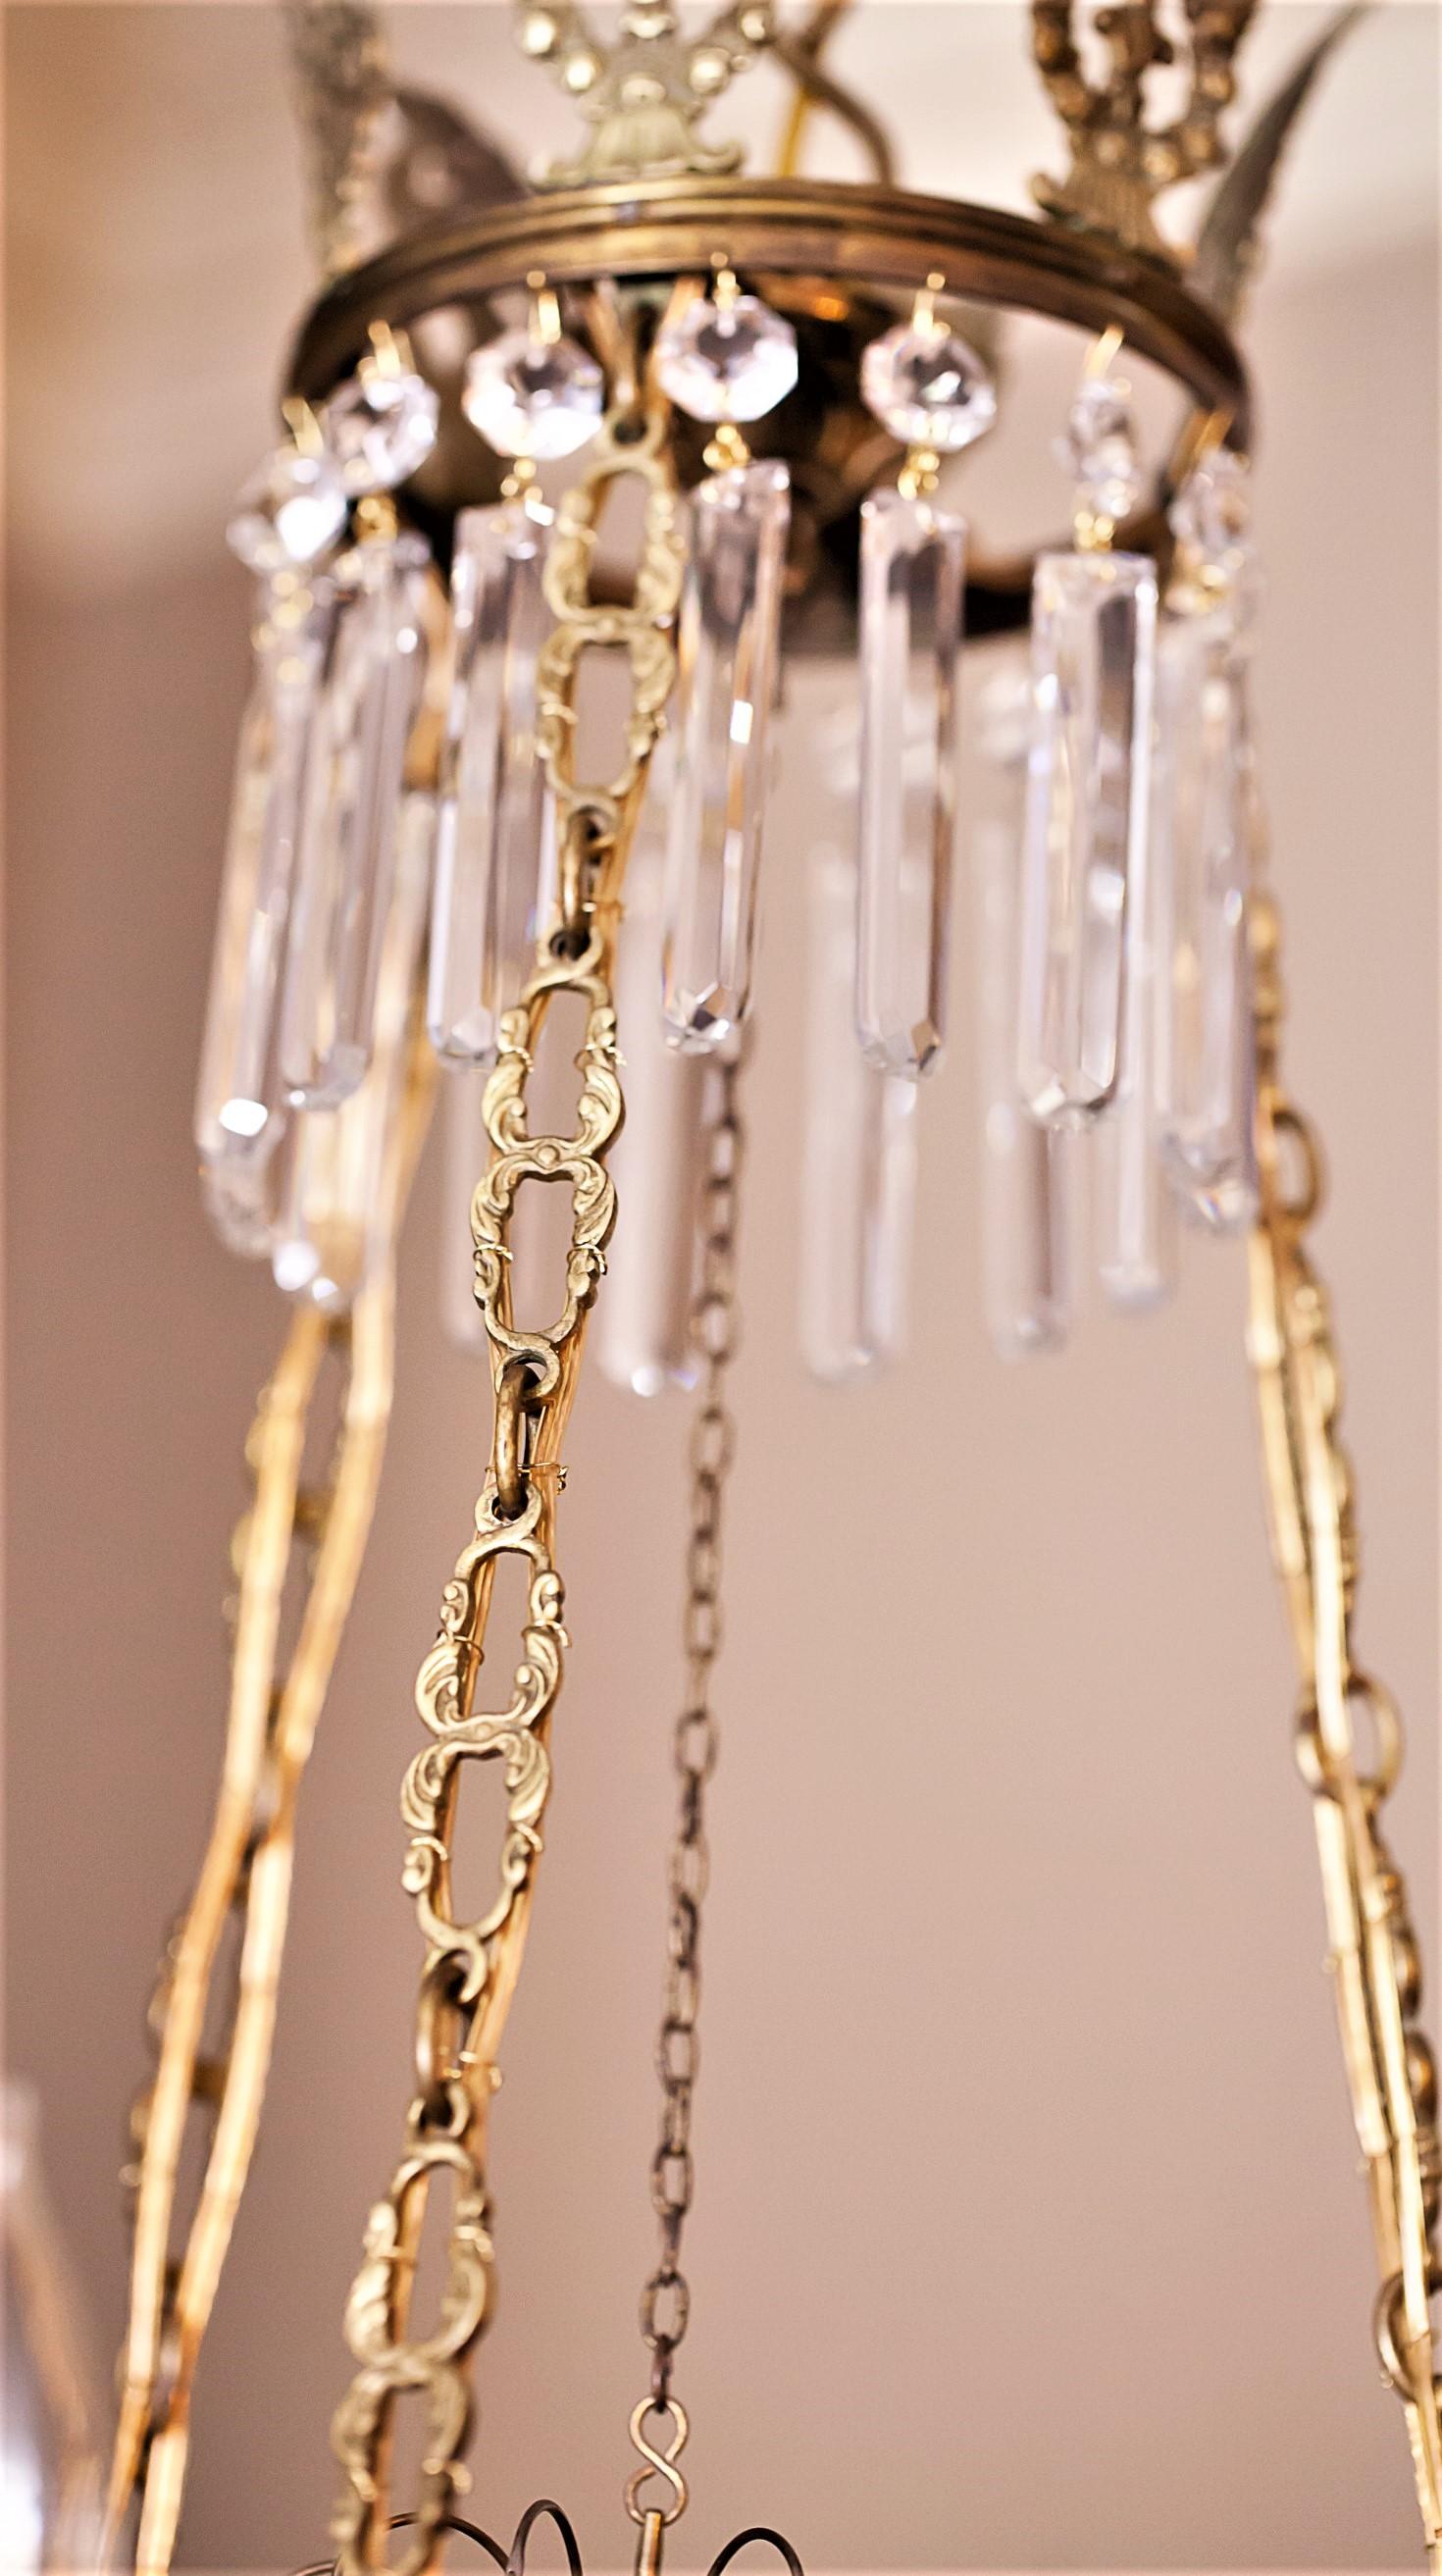 6-Light Neoclassical Style Brass and Crystal Chandelier, Sweden, circa 1890 In Good Condition For Sale In Alexandria, VA